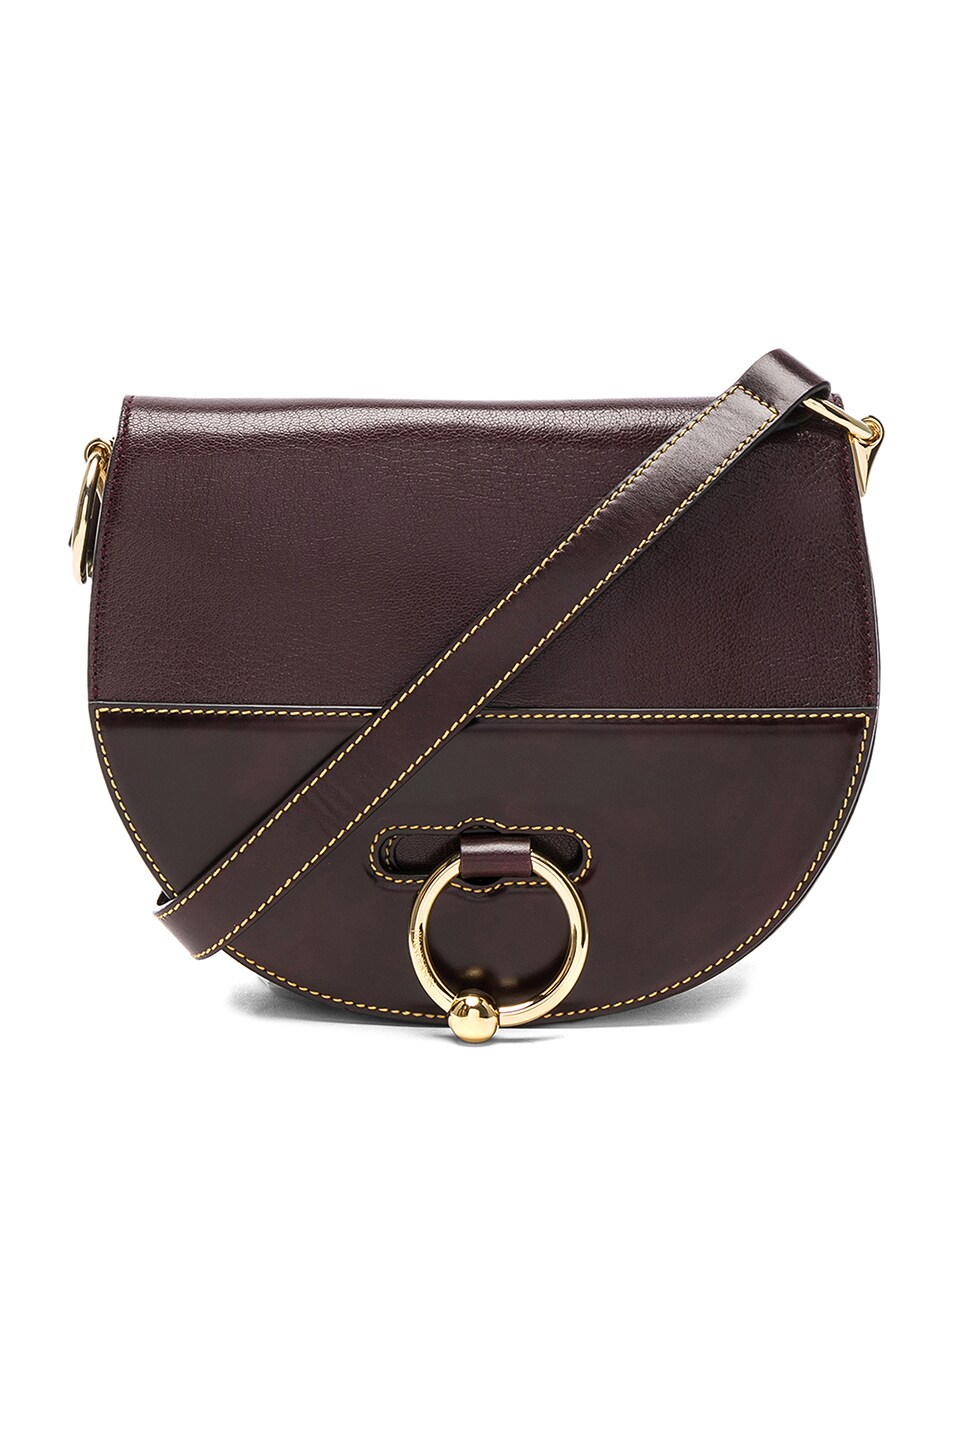 Image 1 of JW Anderson Latch Bag in Burgundy